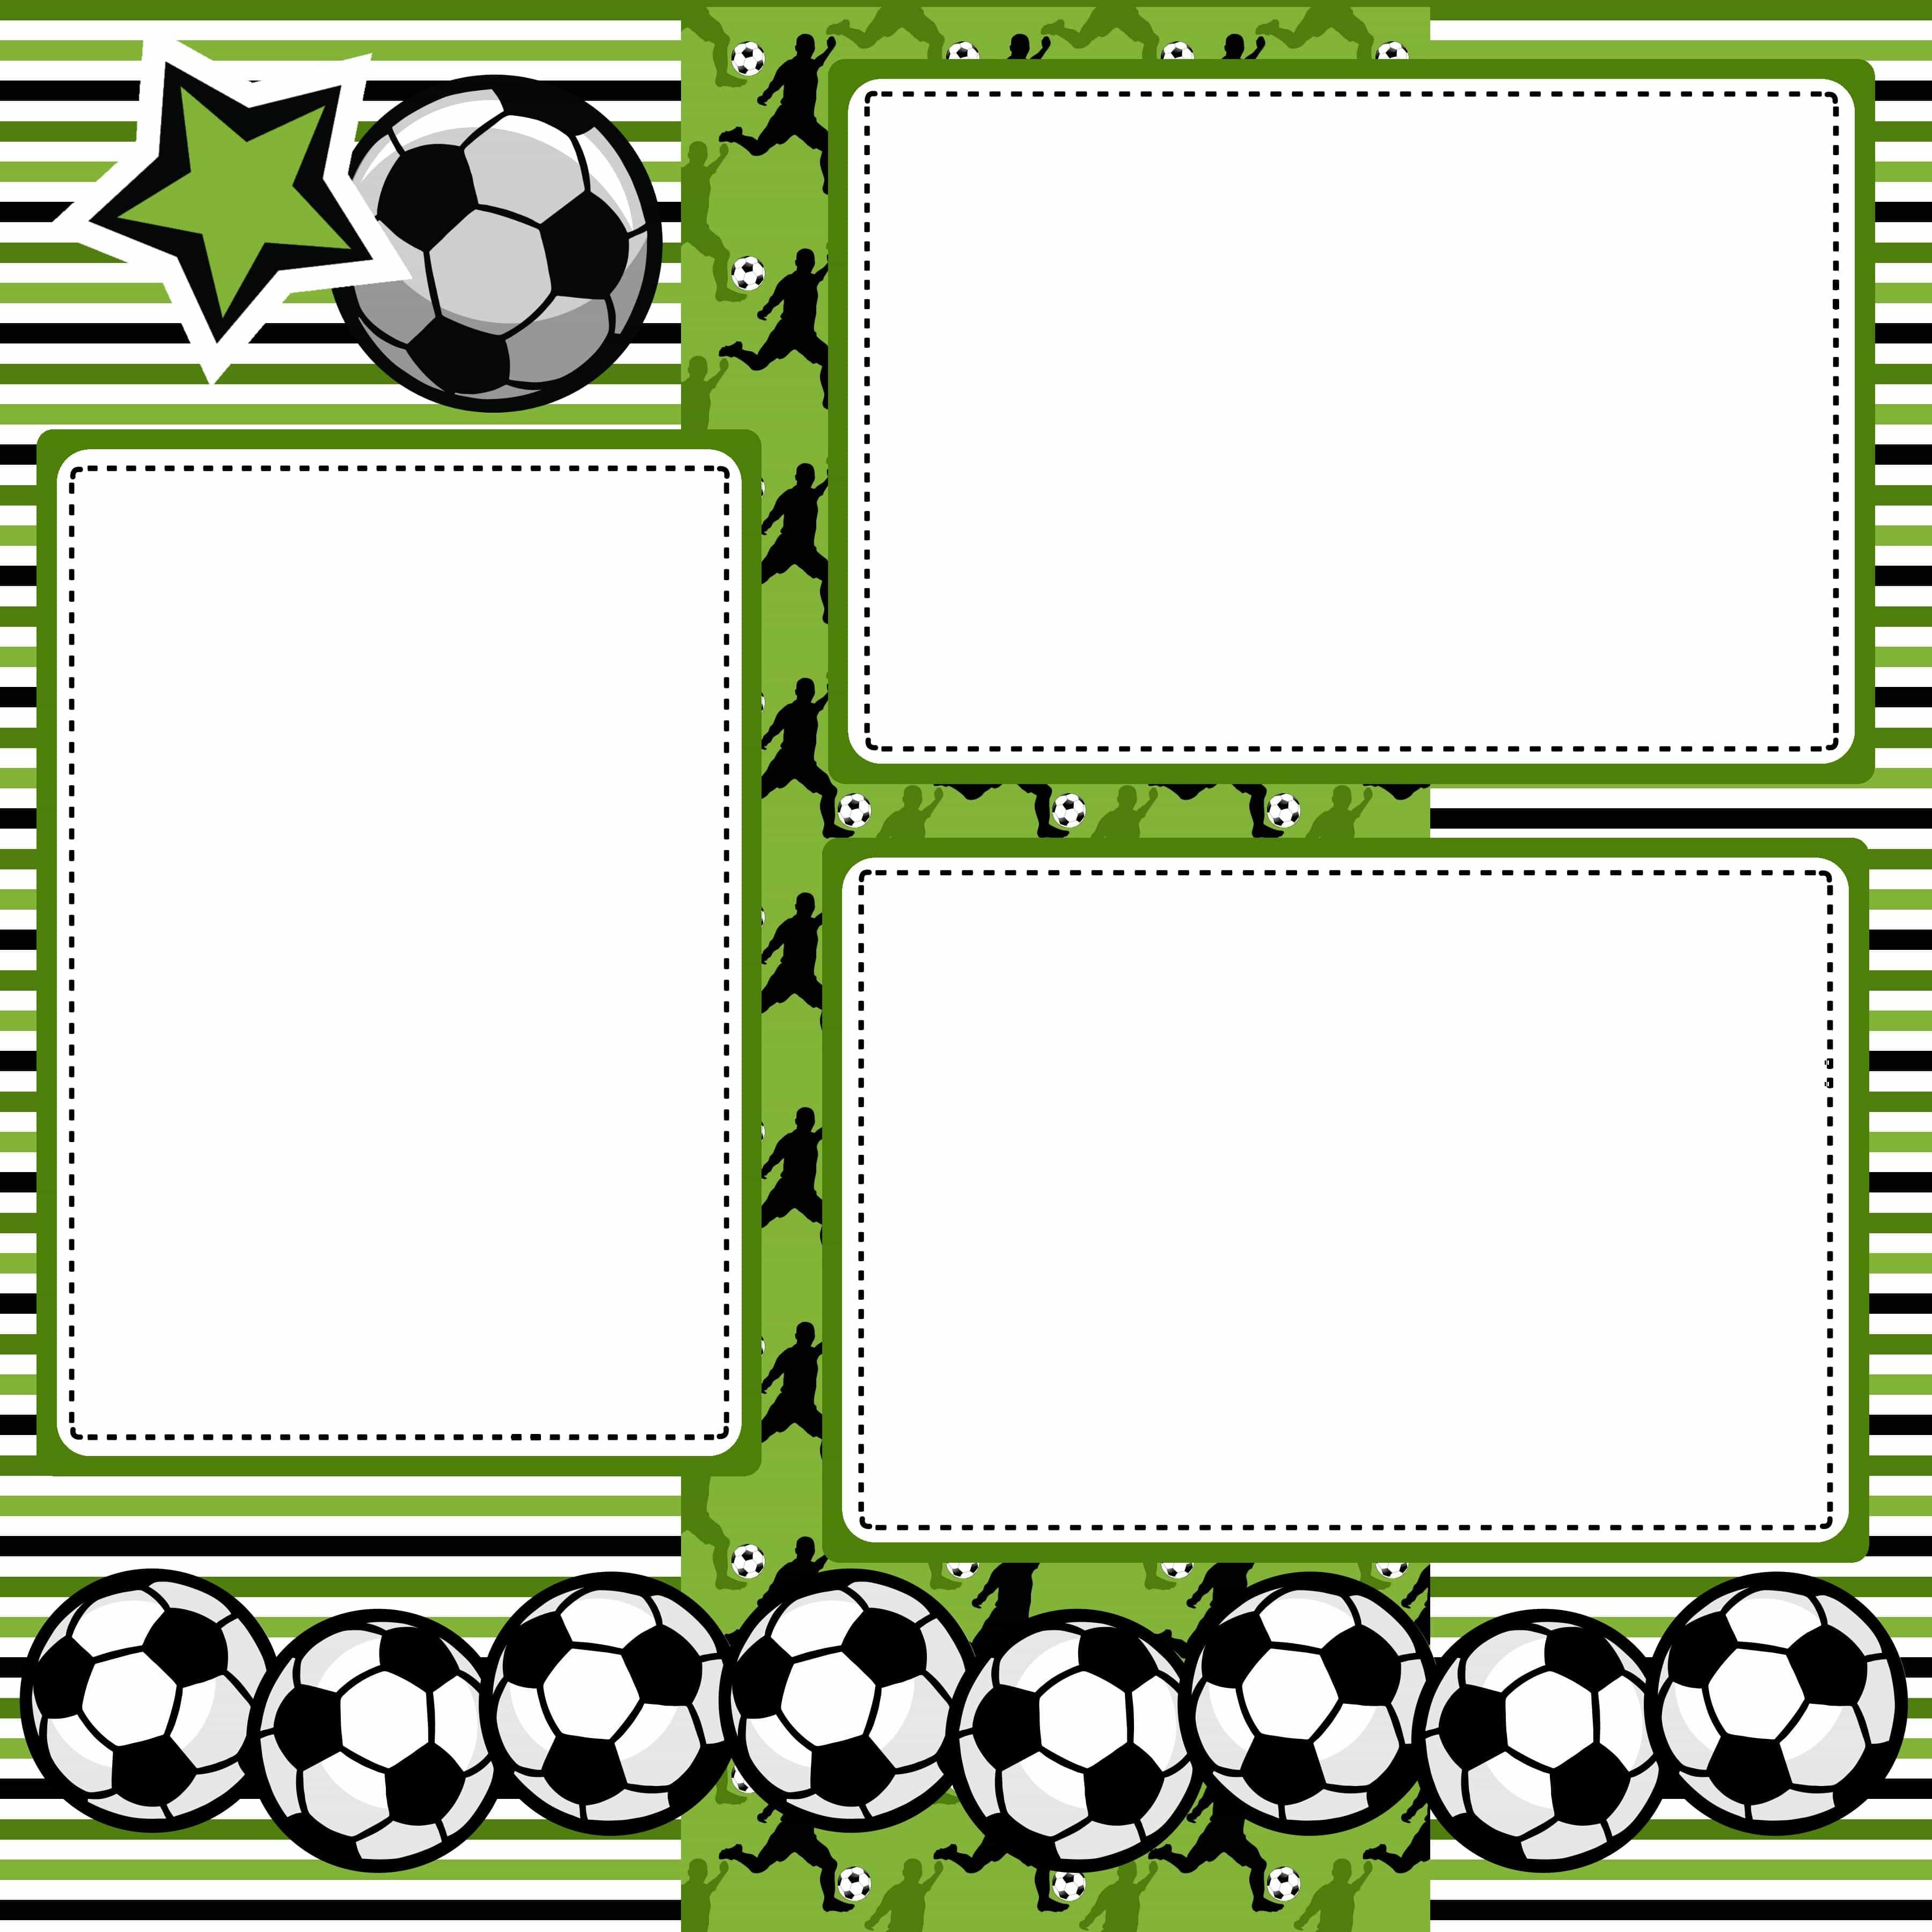 Love Soccer (2) - 12 x 12 Premade, Printed Scrapbook Pages by SSC Designs - Scrapbook Supply Companies